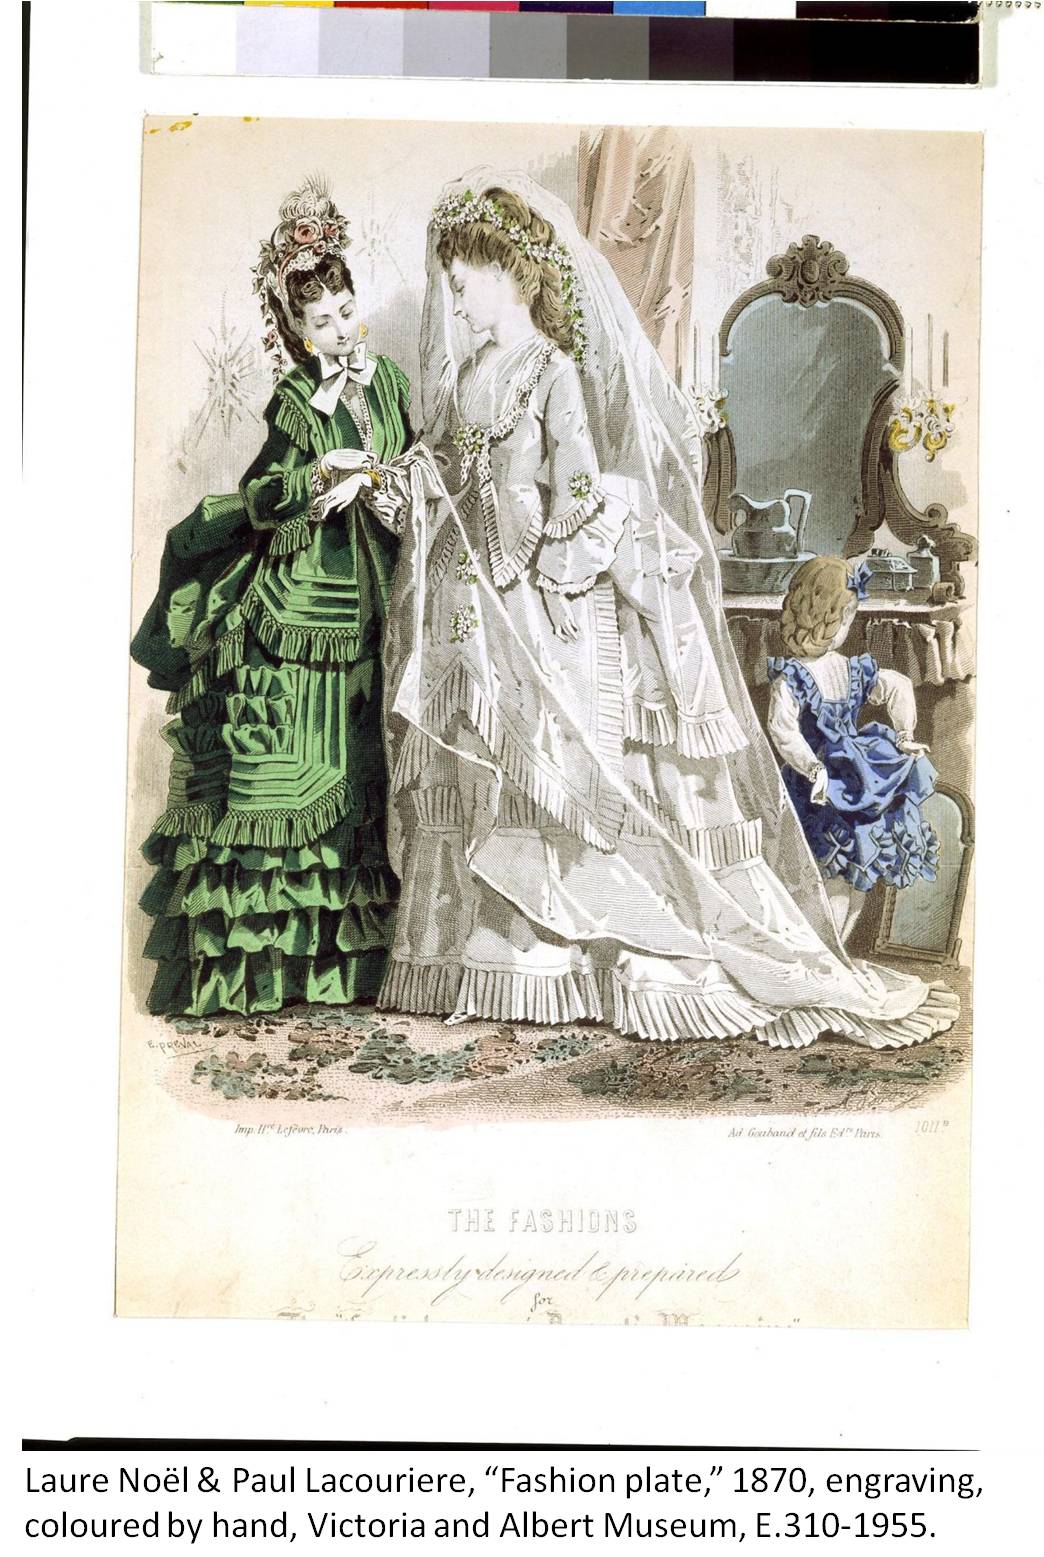 Laure Noël & Paul Lacouriere, “Fashion plate,” 1870, engraving, coloured by hand, Victoria and Albert Museum, E.310-1955, https://collections.vam.ac.uk/item/O580331/fashion-plate-no%C3%ABl-laure.